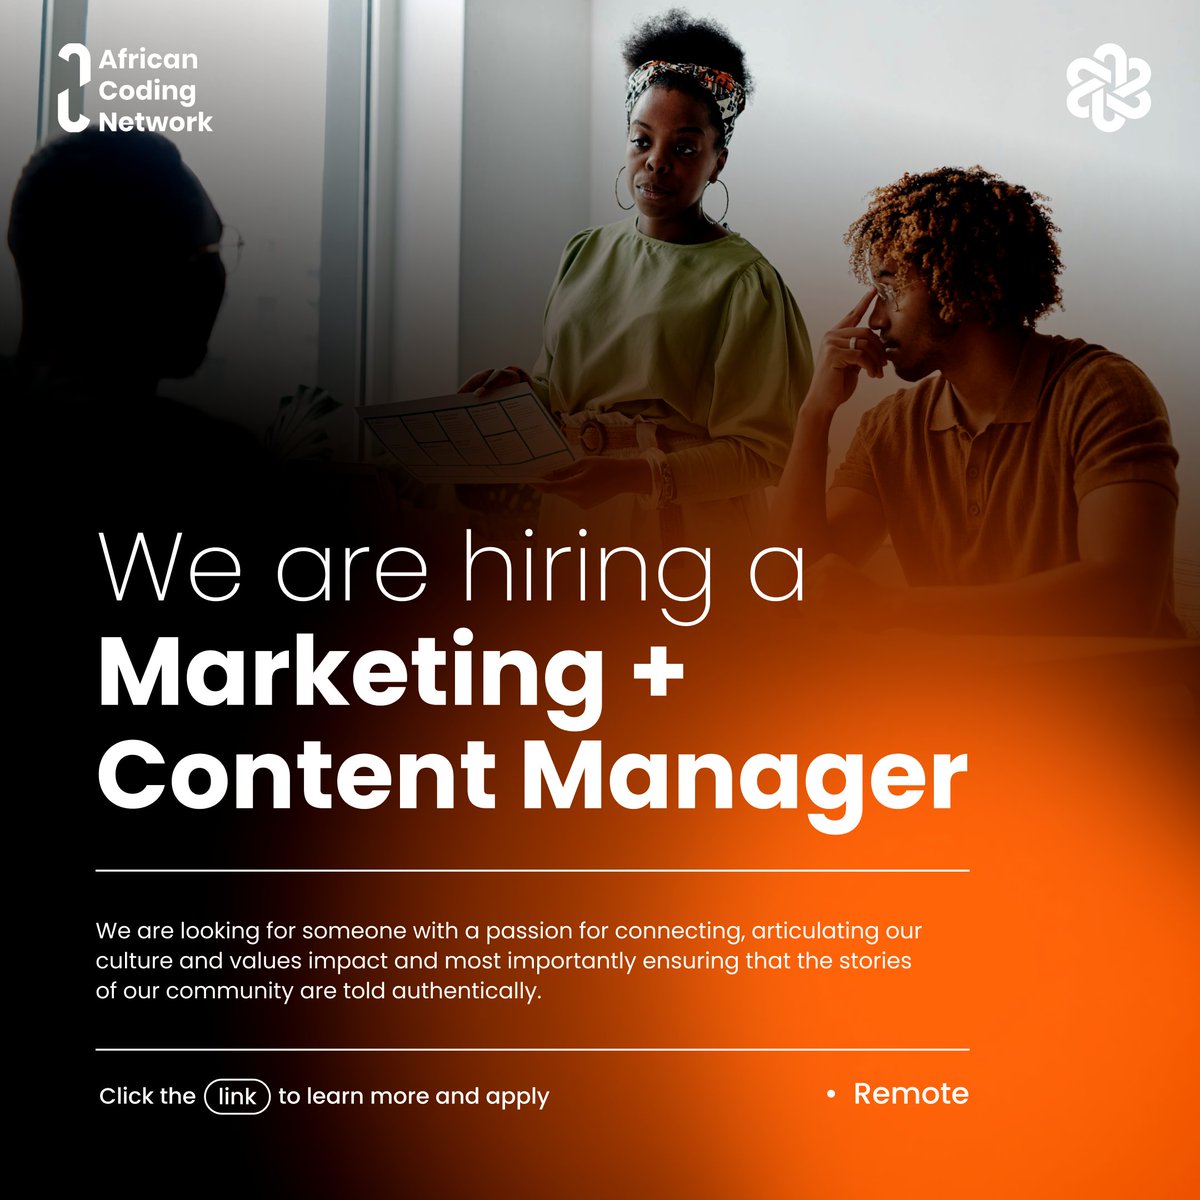 Join UMUZI as a Marketing + Content Manager! We're looking for a mid-level professional passionate about empowering talented individuals. Responsibilities include creating content, managing social media, analyzing campaigns, and implementing new strategies.